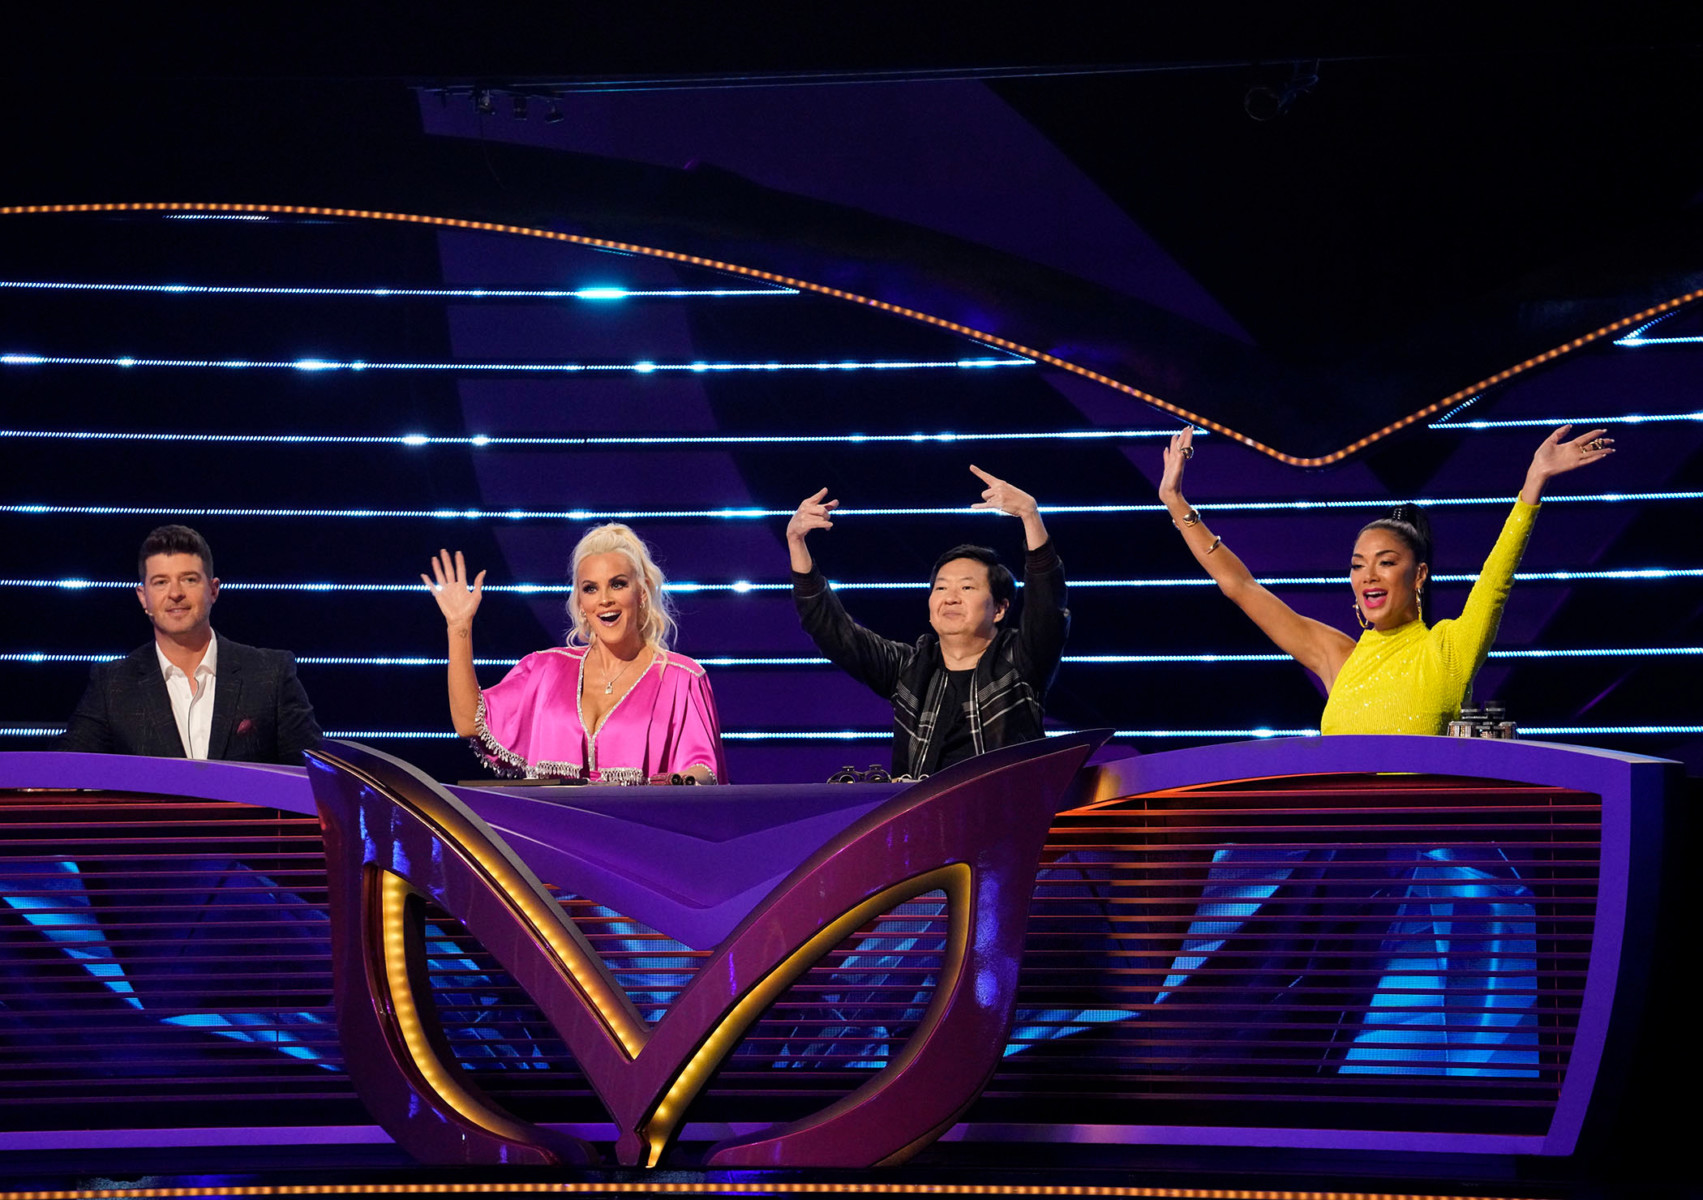 Six contestants are also still left from the first two groups of the competition show, which features Robin Thicke, Jenny McCarthy, Ken Jeong and Nicole Scherzinger as panlists